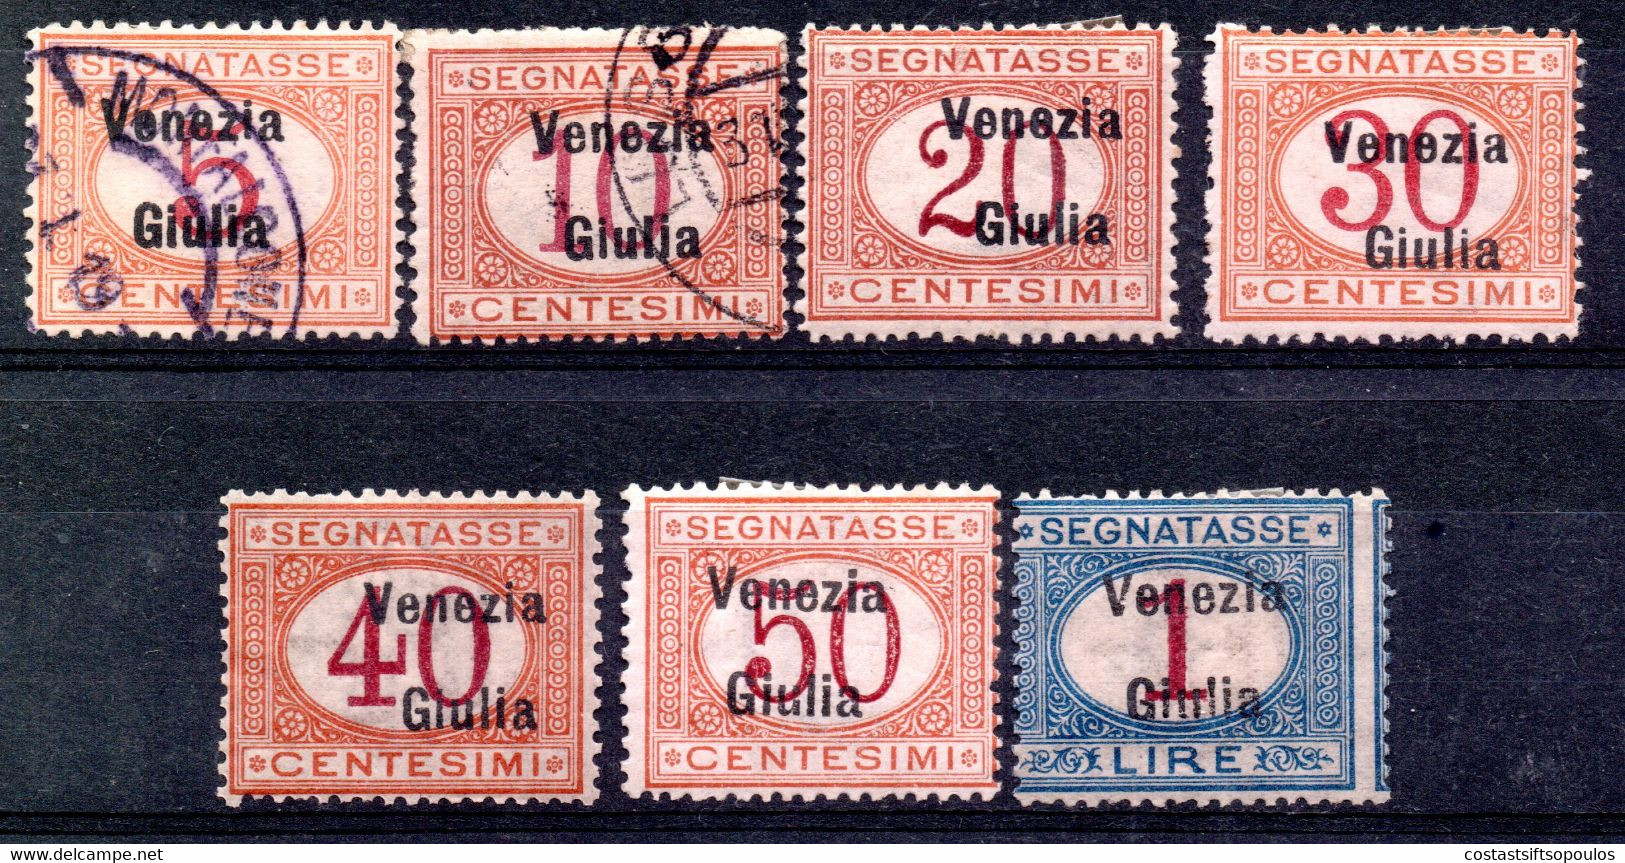 604.ITALY,AUSTRIA,VENEZIA GIULIA,1918 POSTAGE DUE,#1-7(1-2 USED.3-7 MH)HIGH VALUES SIGNED,4 SCANS - Vénétie Julienne